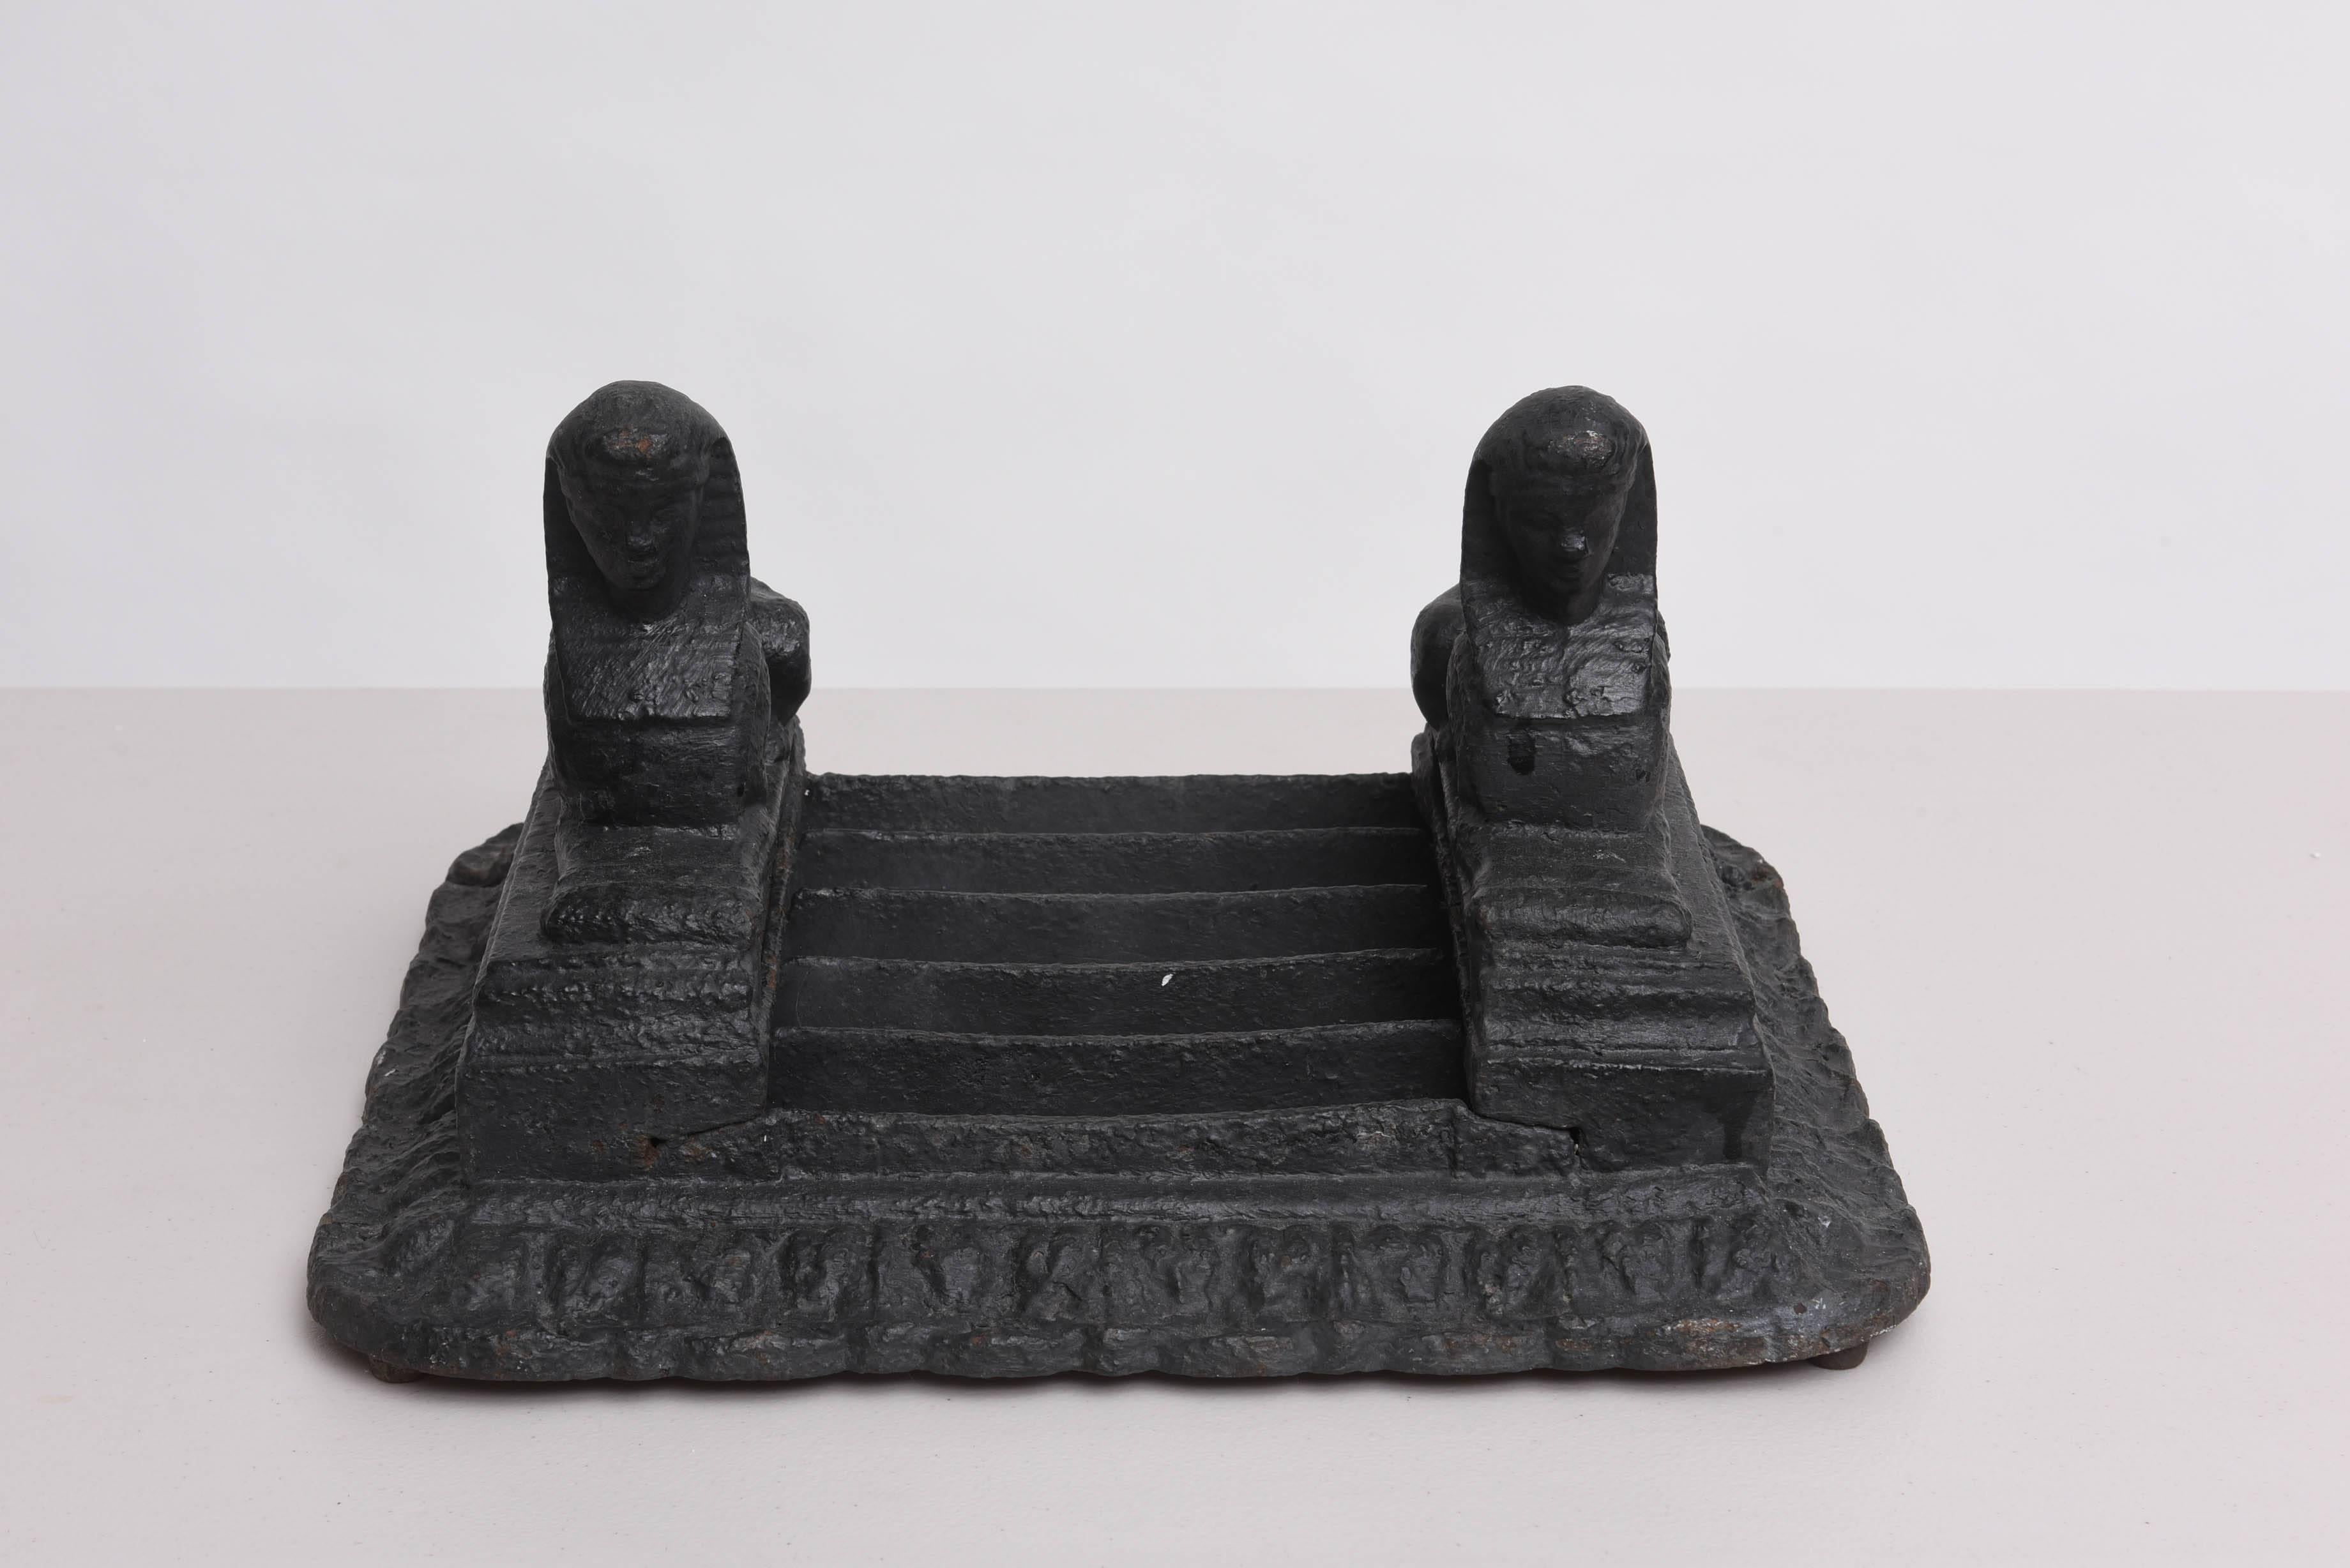 This rare early 19th century boot-scraper was created by the firm of Archibald Kenrick & Sons in England during the height of Napoleons reign in France. They are made of cast-iron and are in the Egyptian taste with a pair of flanking sphinxes